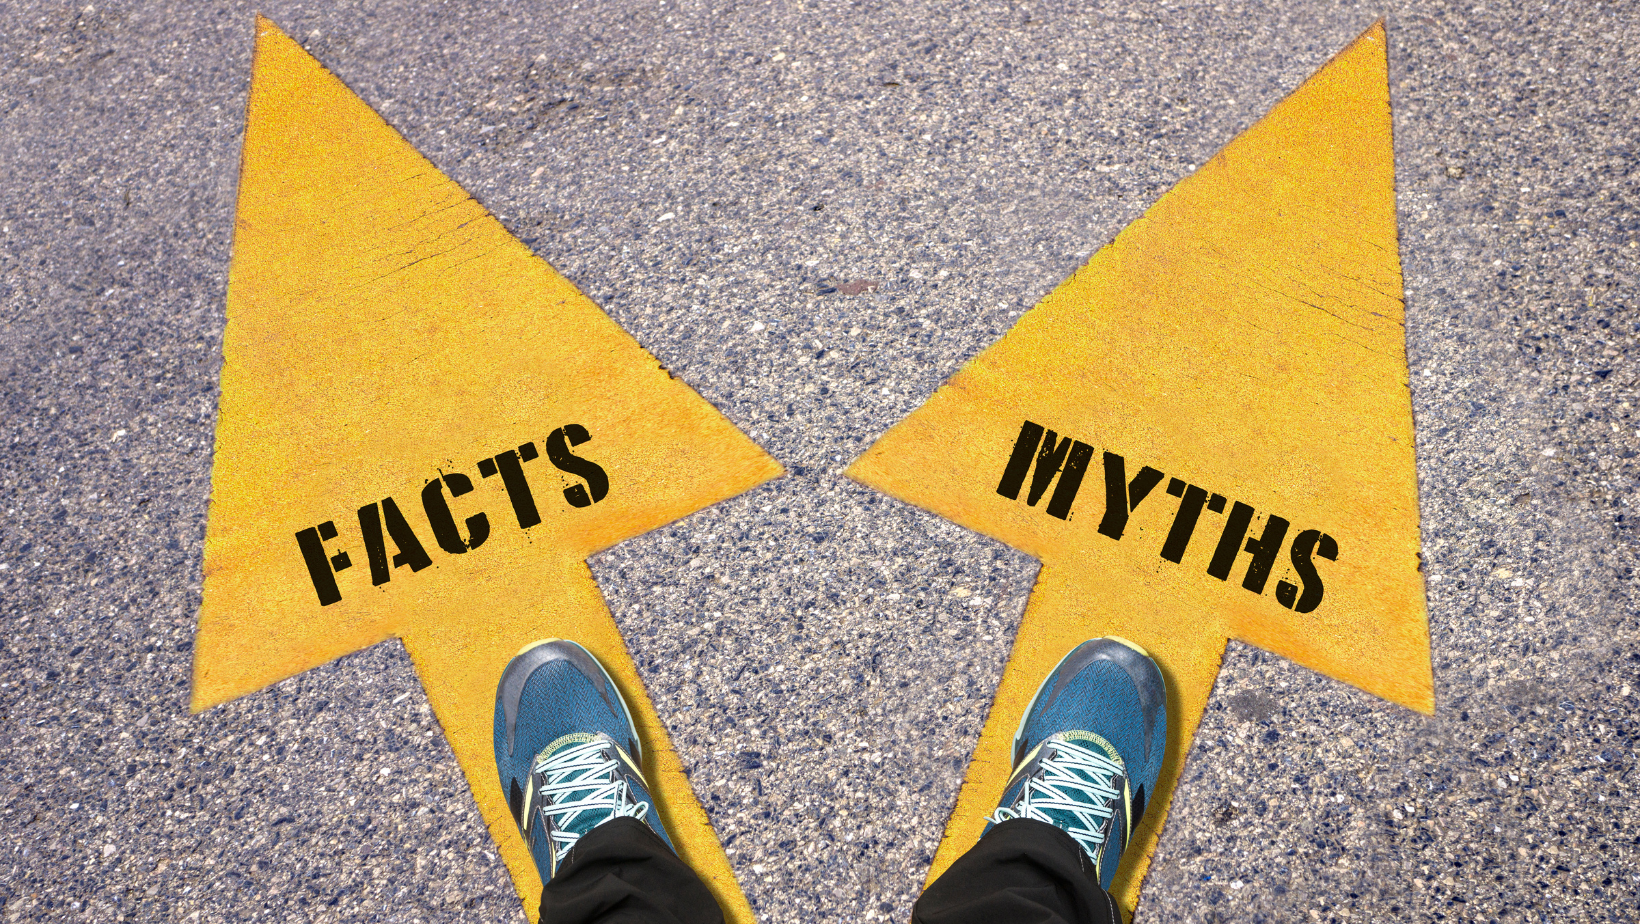 6 Myths of Background Screening (Debunked)